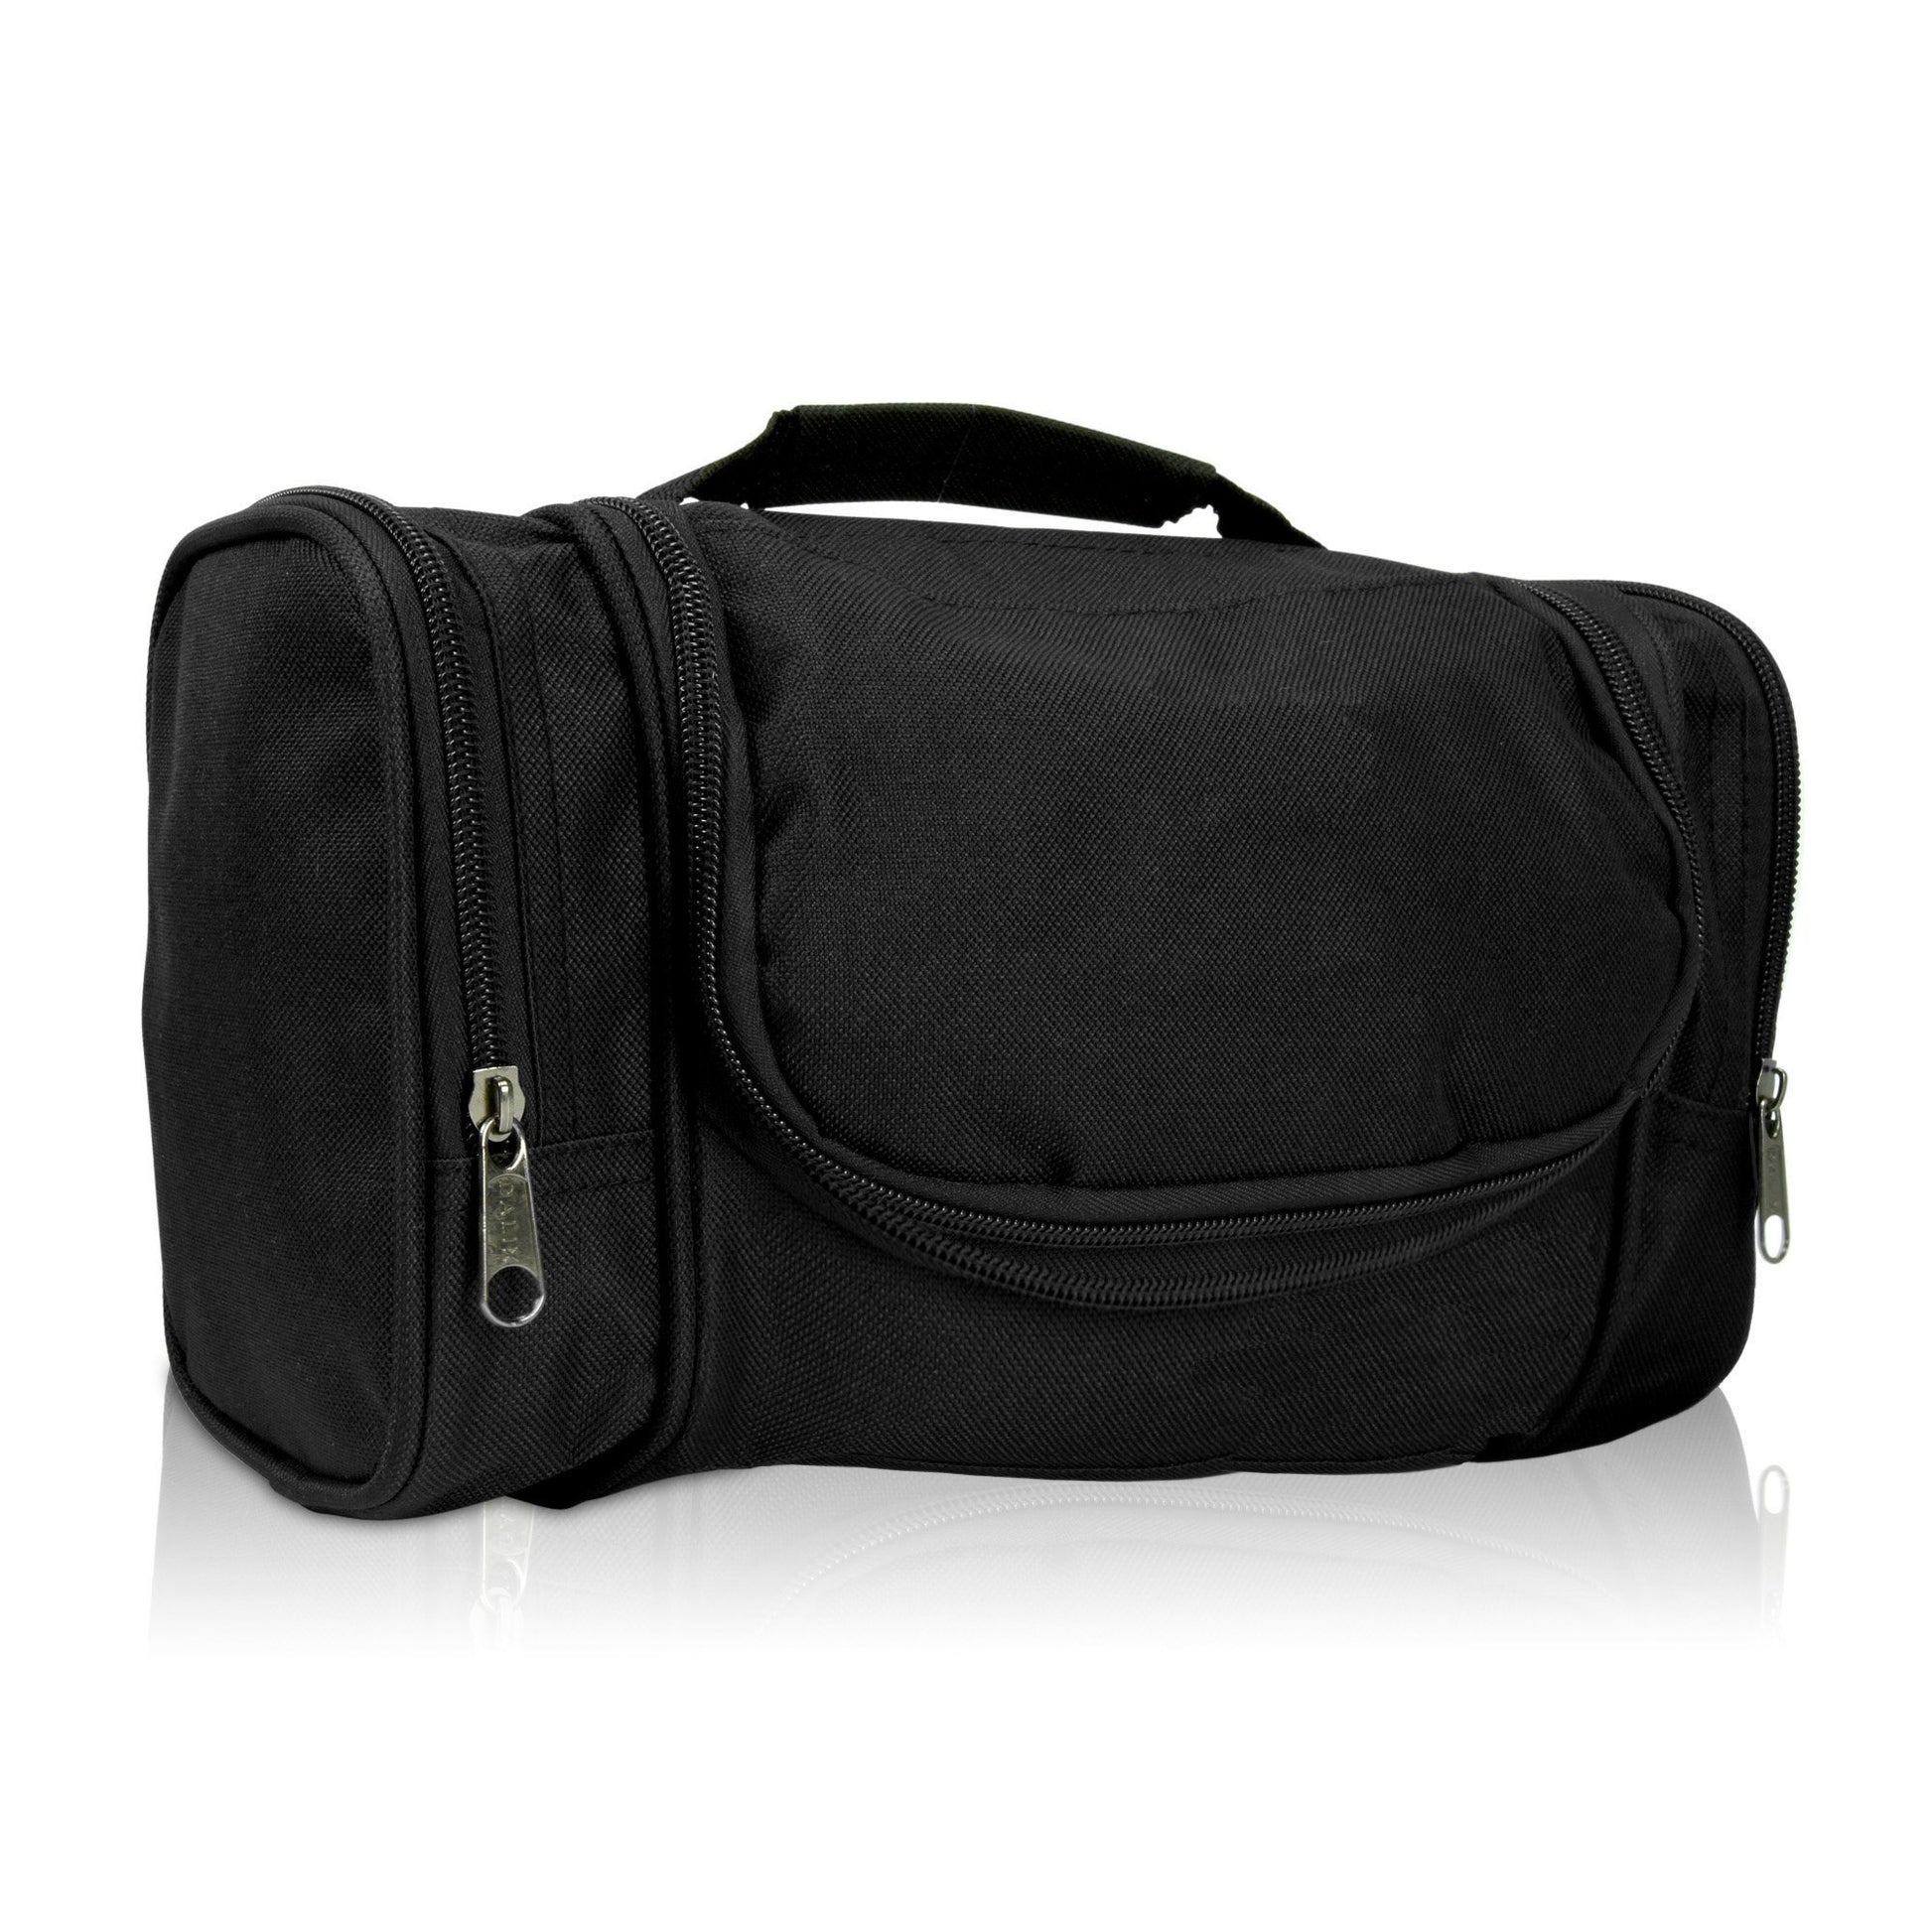 DALIX Hanging Travel Toiletry Kit Accessories Bag (8 Colors) Business DALIX Charcoal Black 